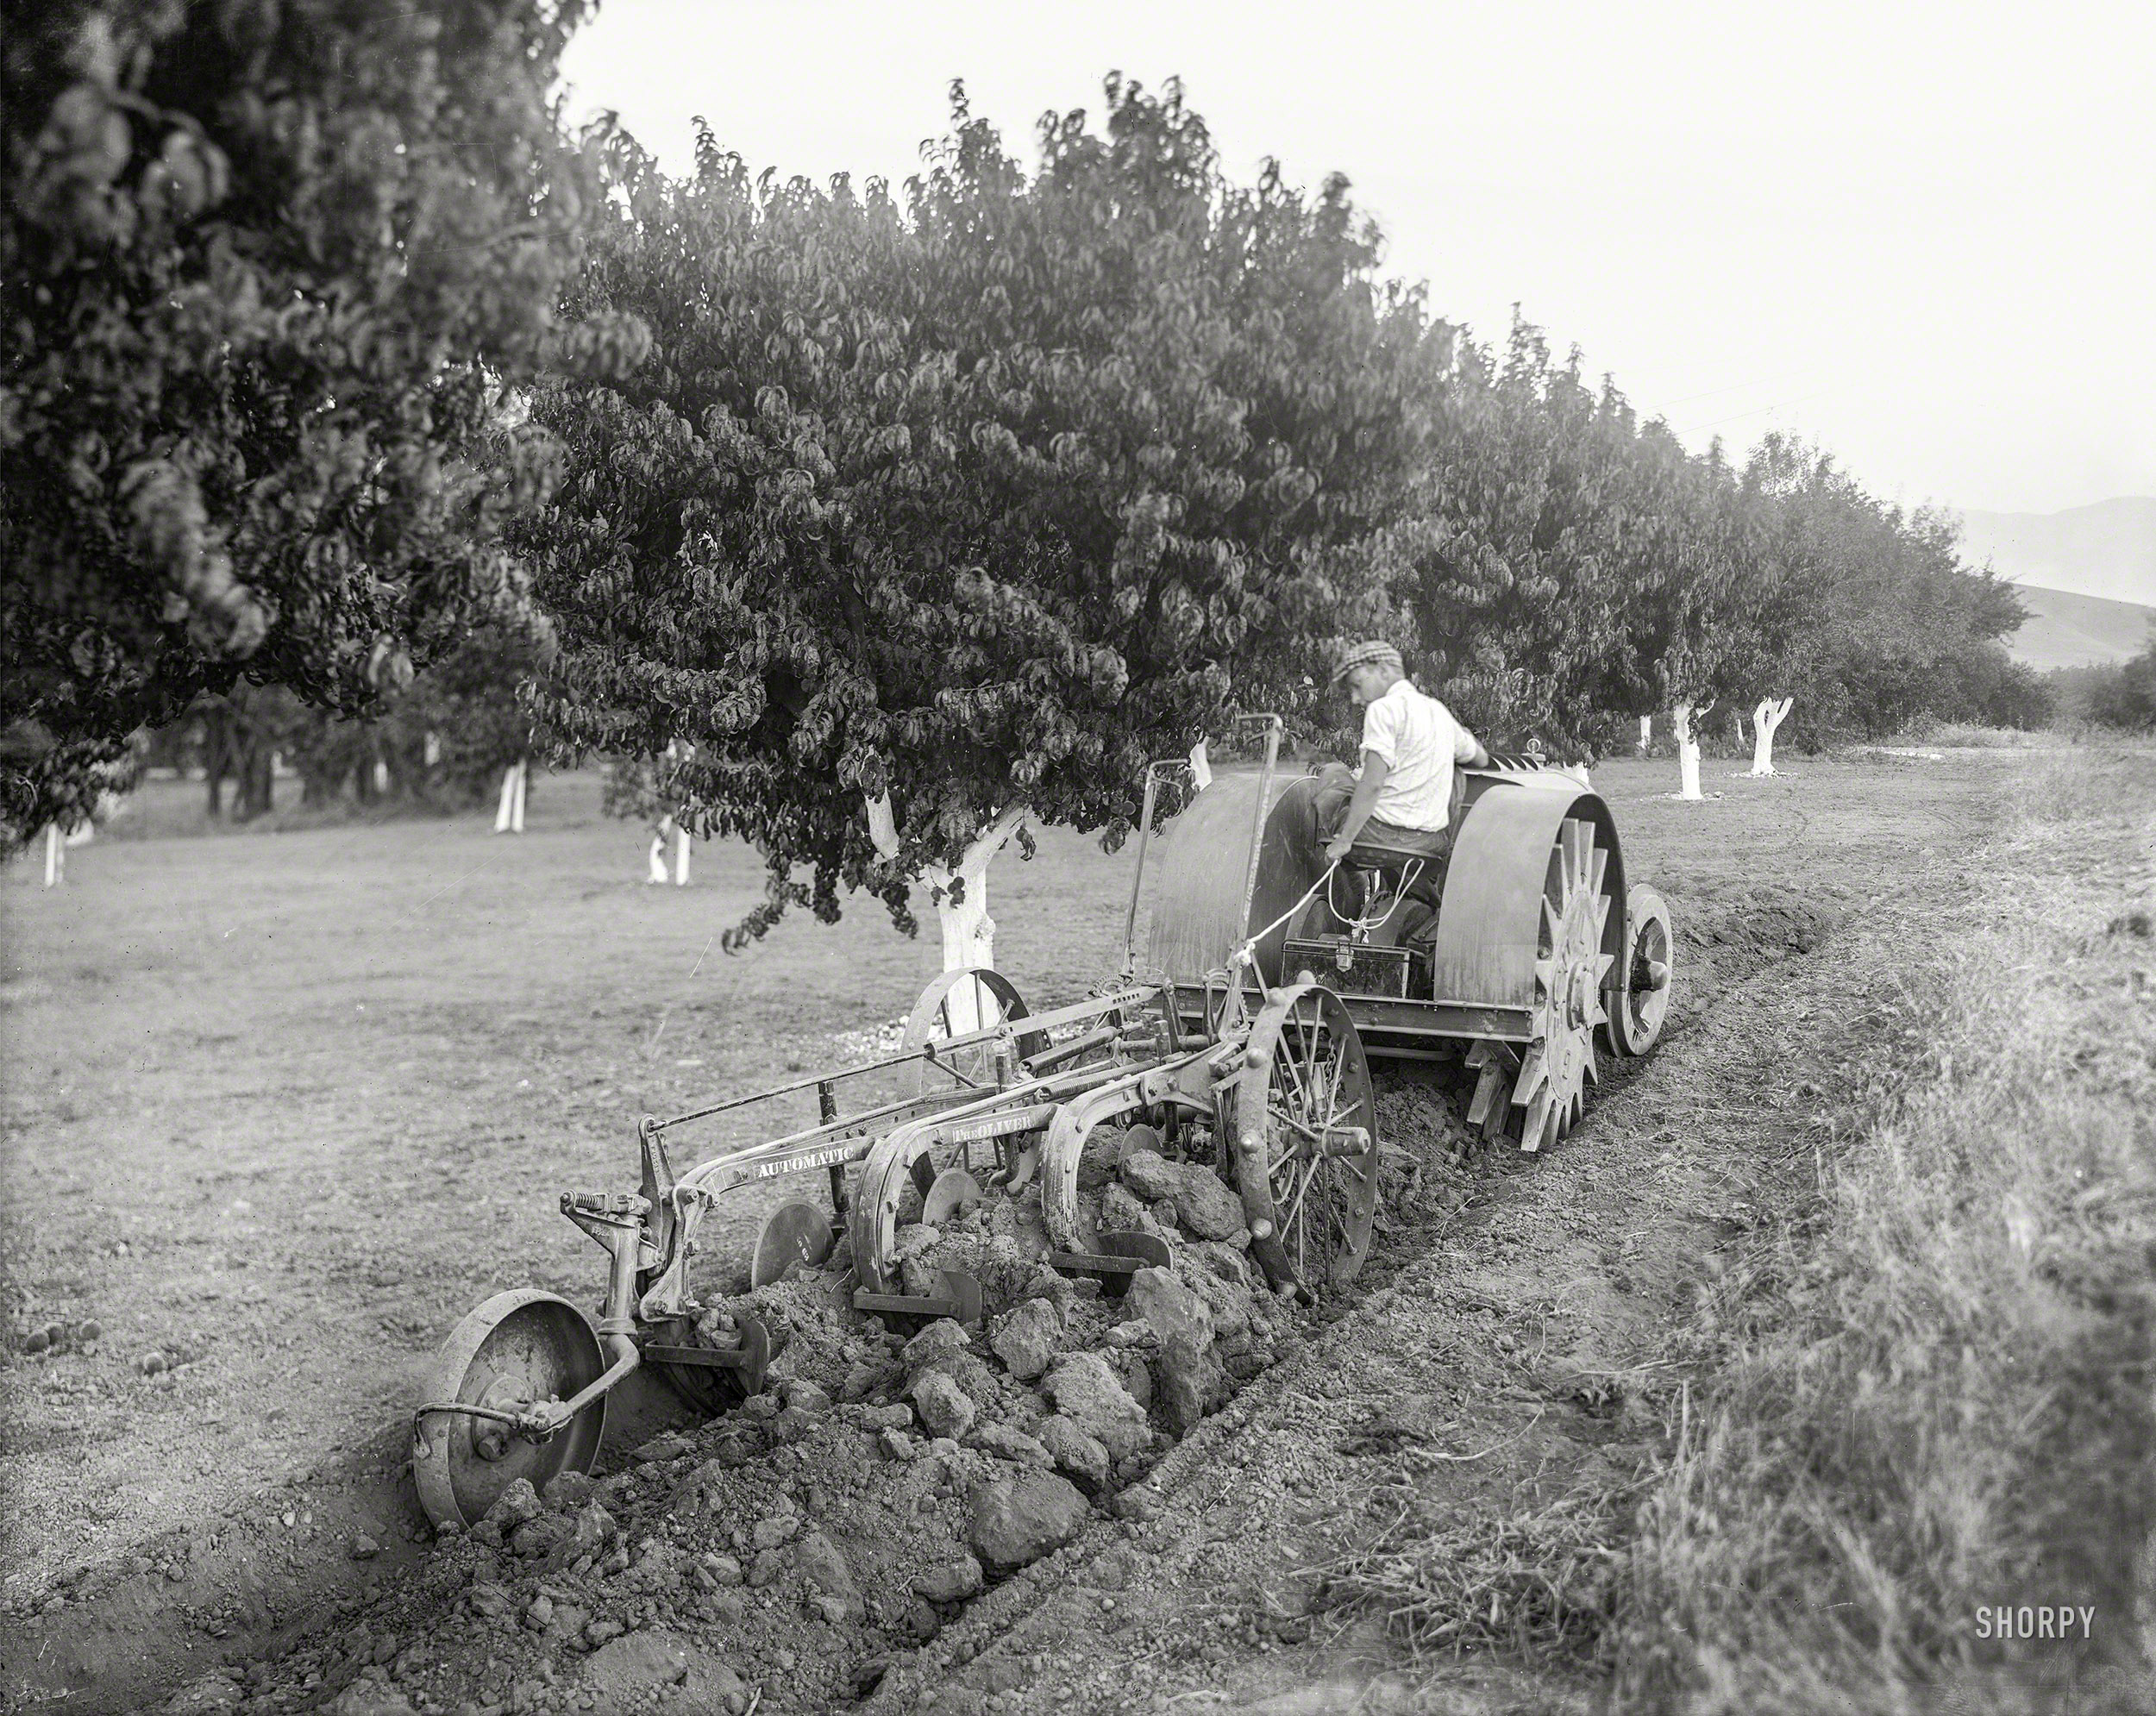 Oakland, Calif., circa 1918. "Walking Tractor -- Fageol orchard tractor demonstration." Latest entry in the Shorpy Catalogue of Curious Contraptions. 8x10 glass negative by the Cheney Photo Advertising Co. View full size.